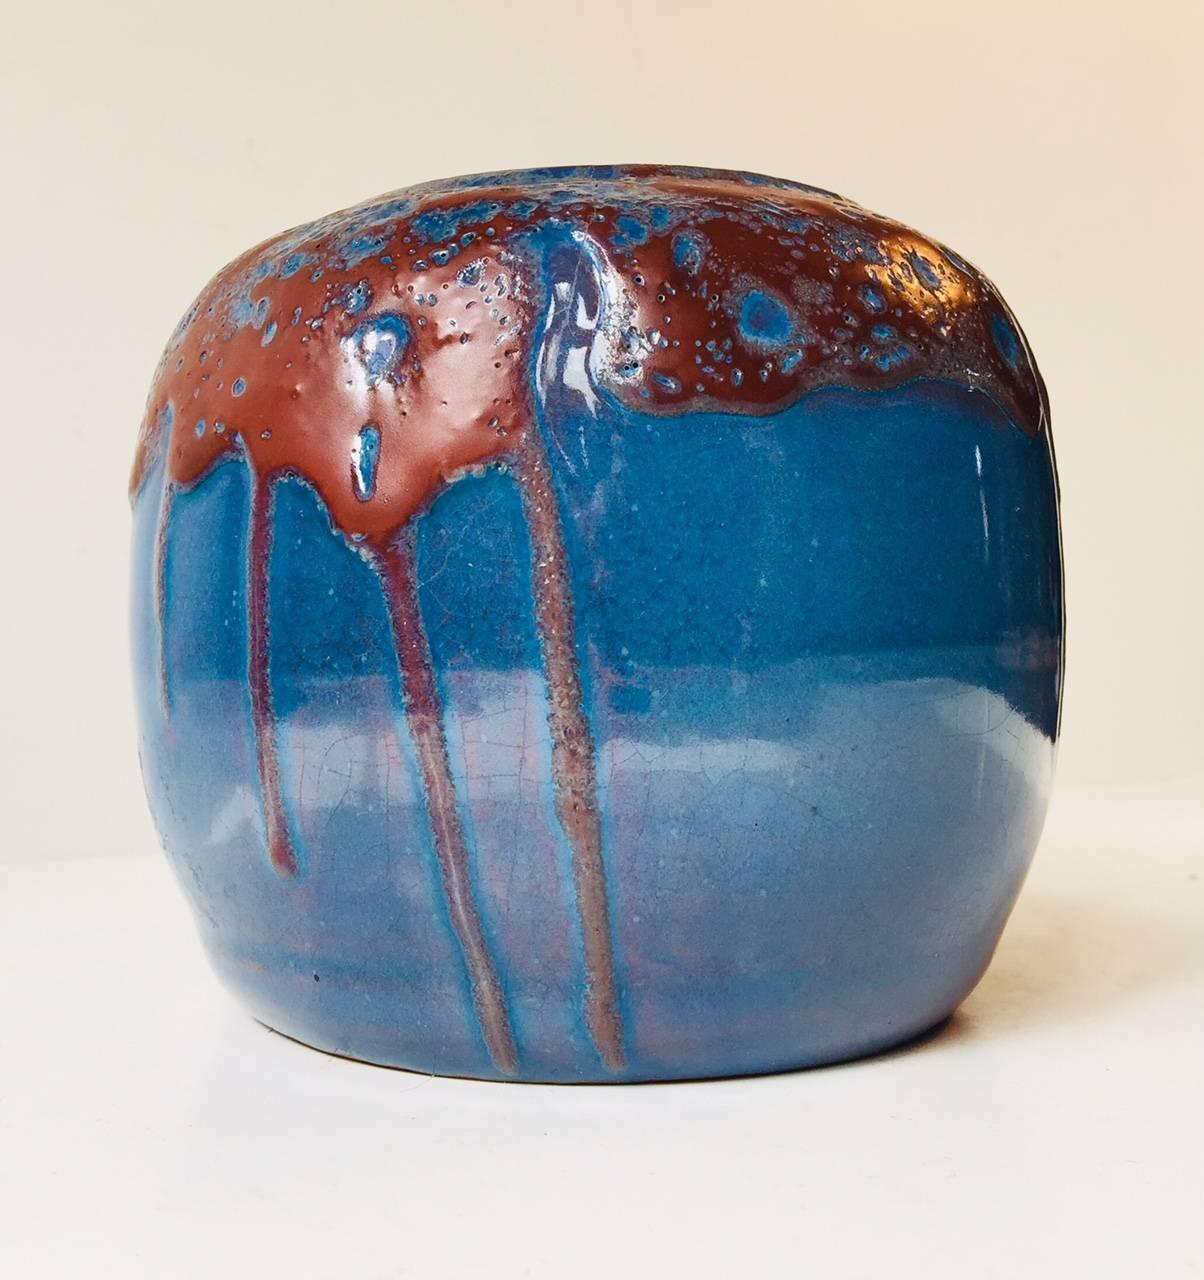 Scandinavian pottery vase decorated in a purple toned blue flambe main-glaze and an over-glaze/drip glaze in Oxblood red. Unidentified Scandinavian ceramist: EHP and its dated 1936. The style of this piece is reminiscent of Chinese Chien Lung.